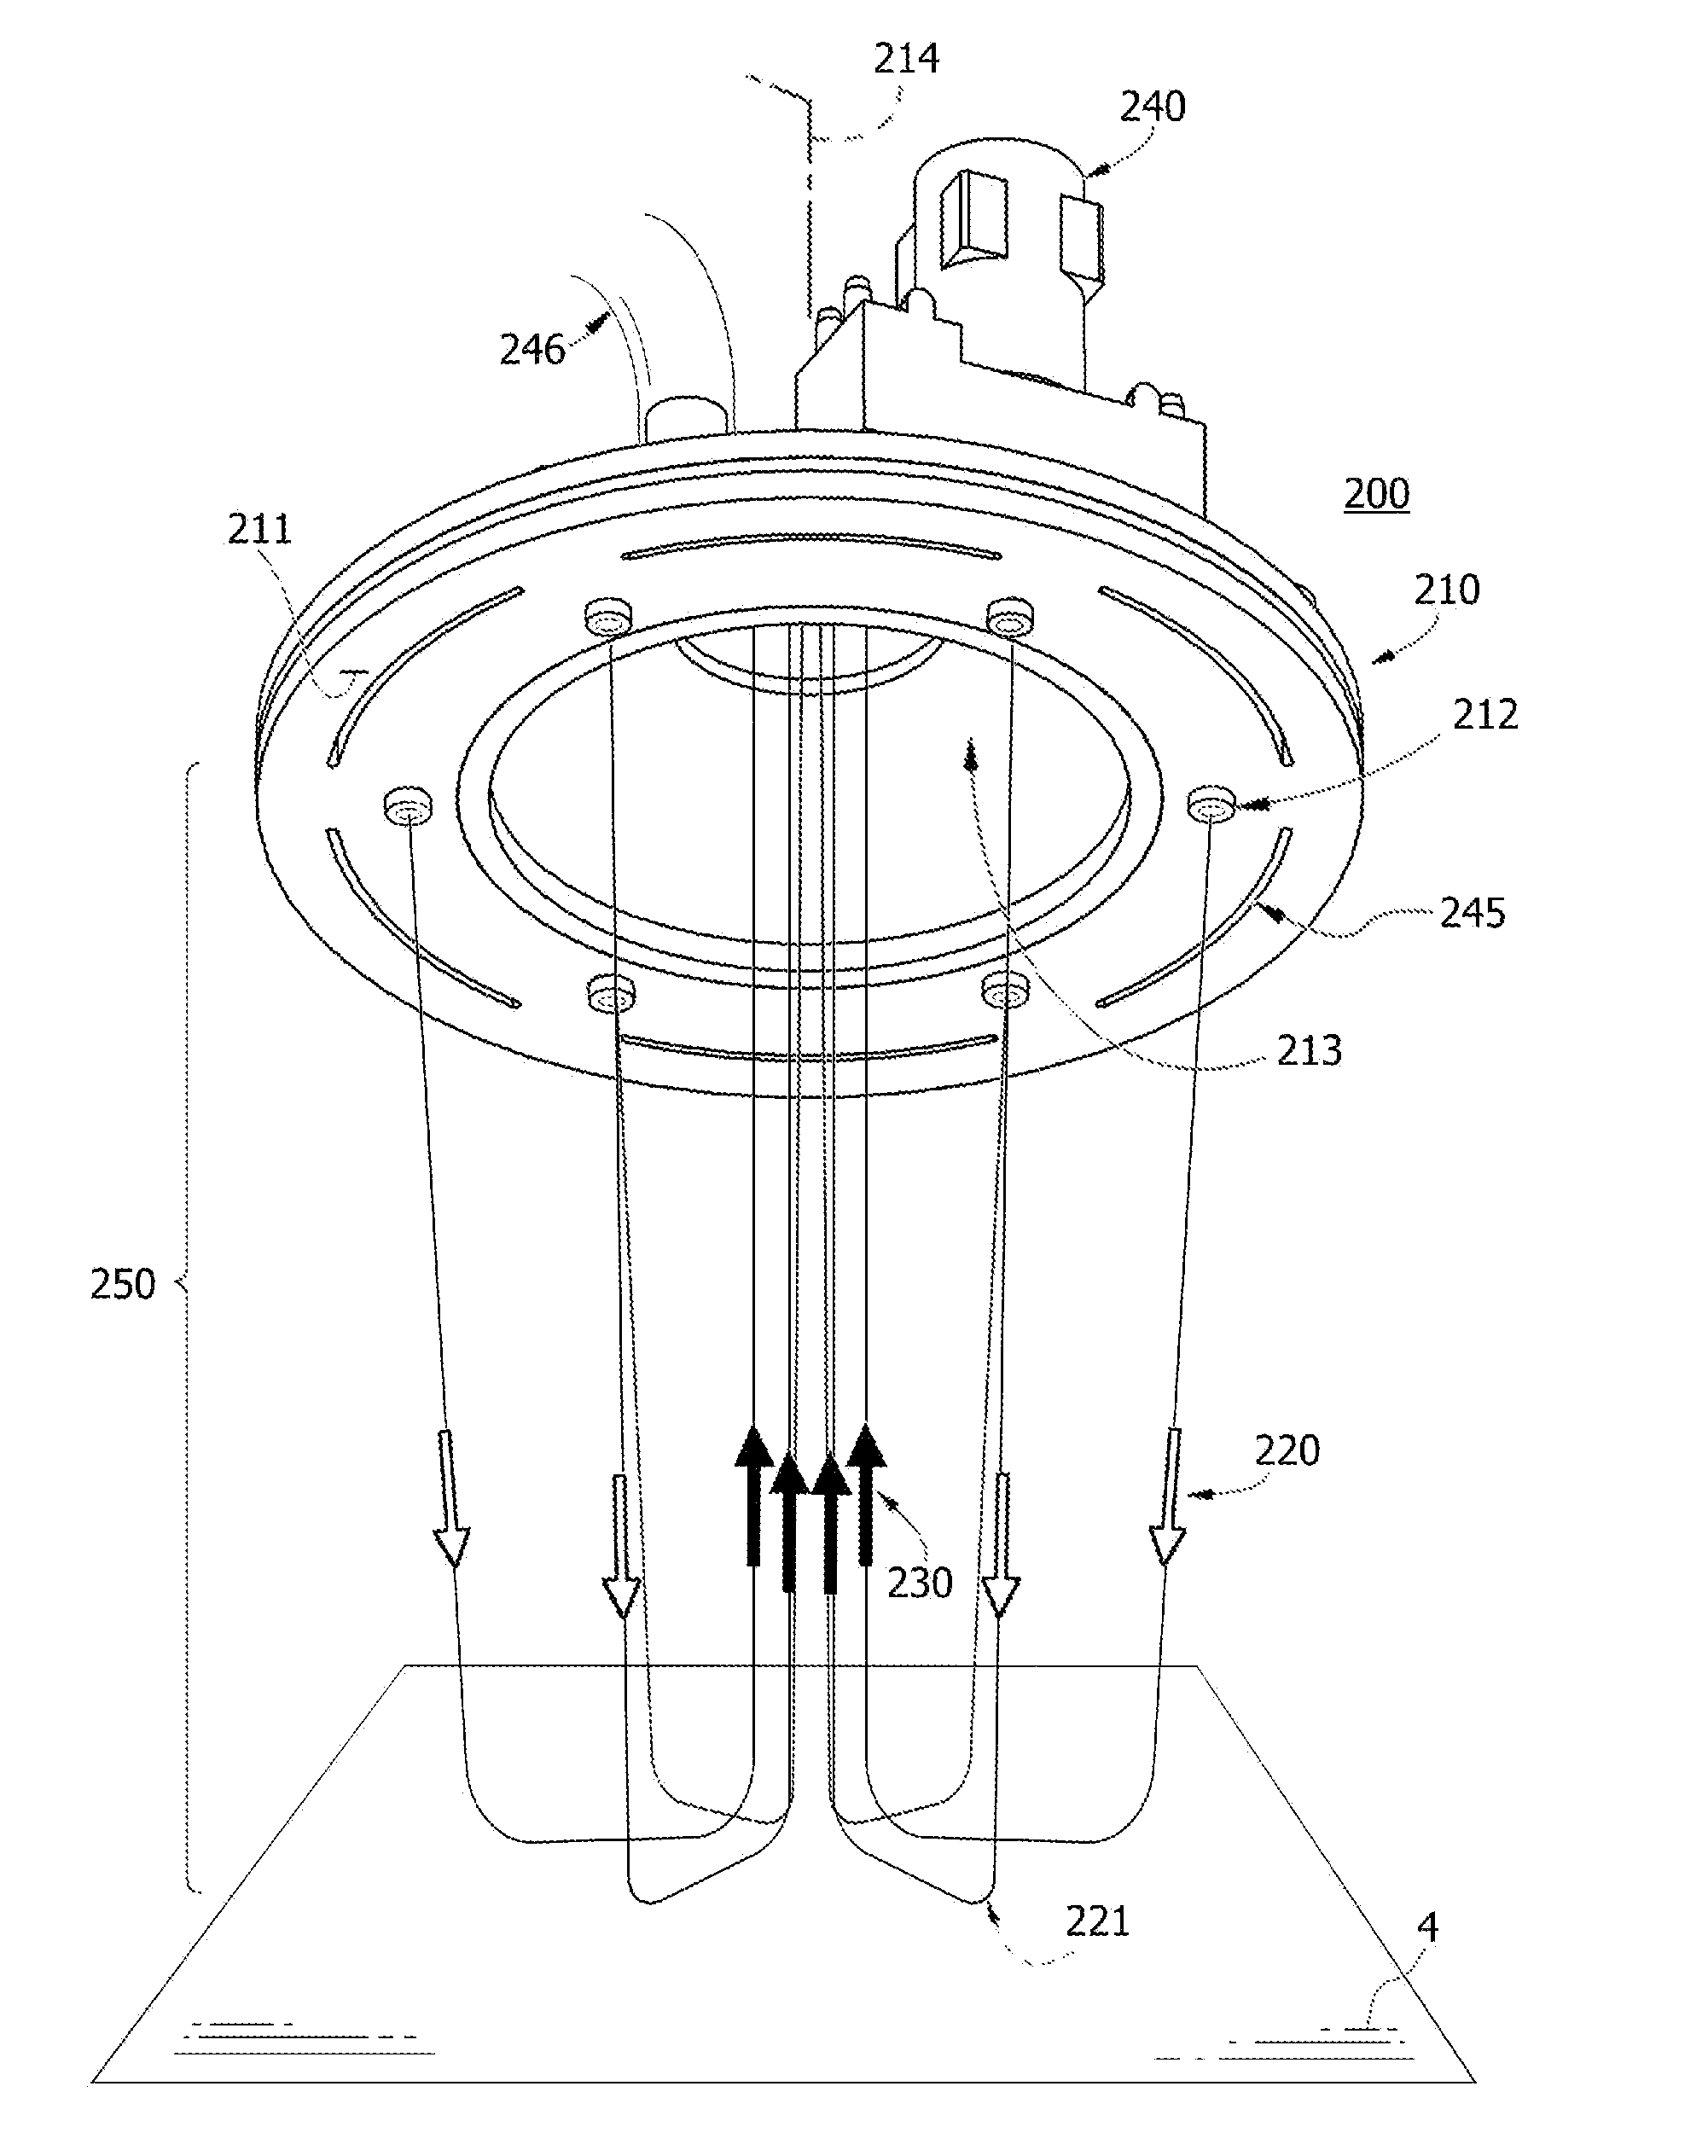 Particle interrogation devices and methods